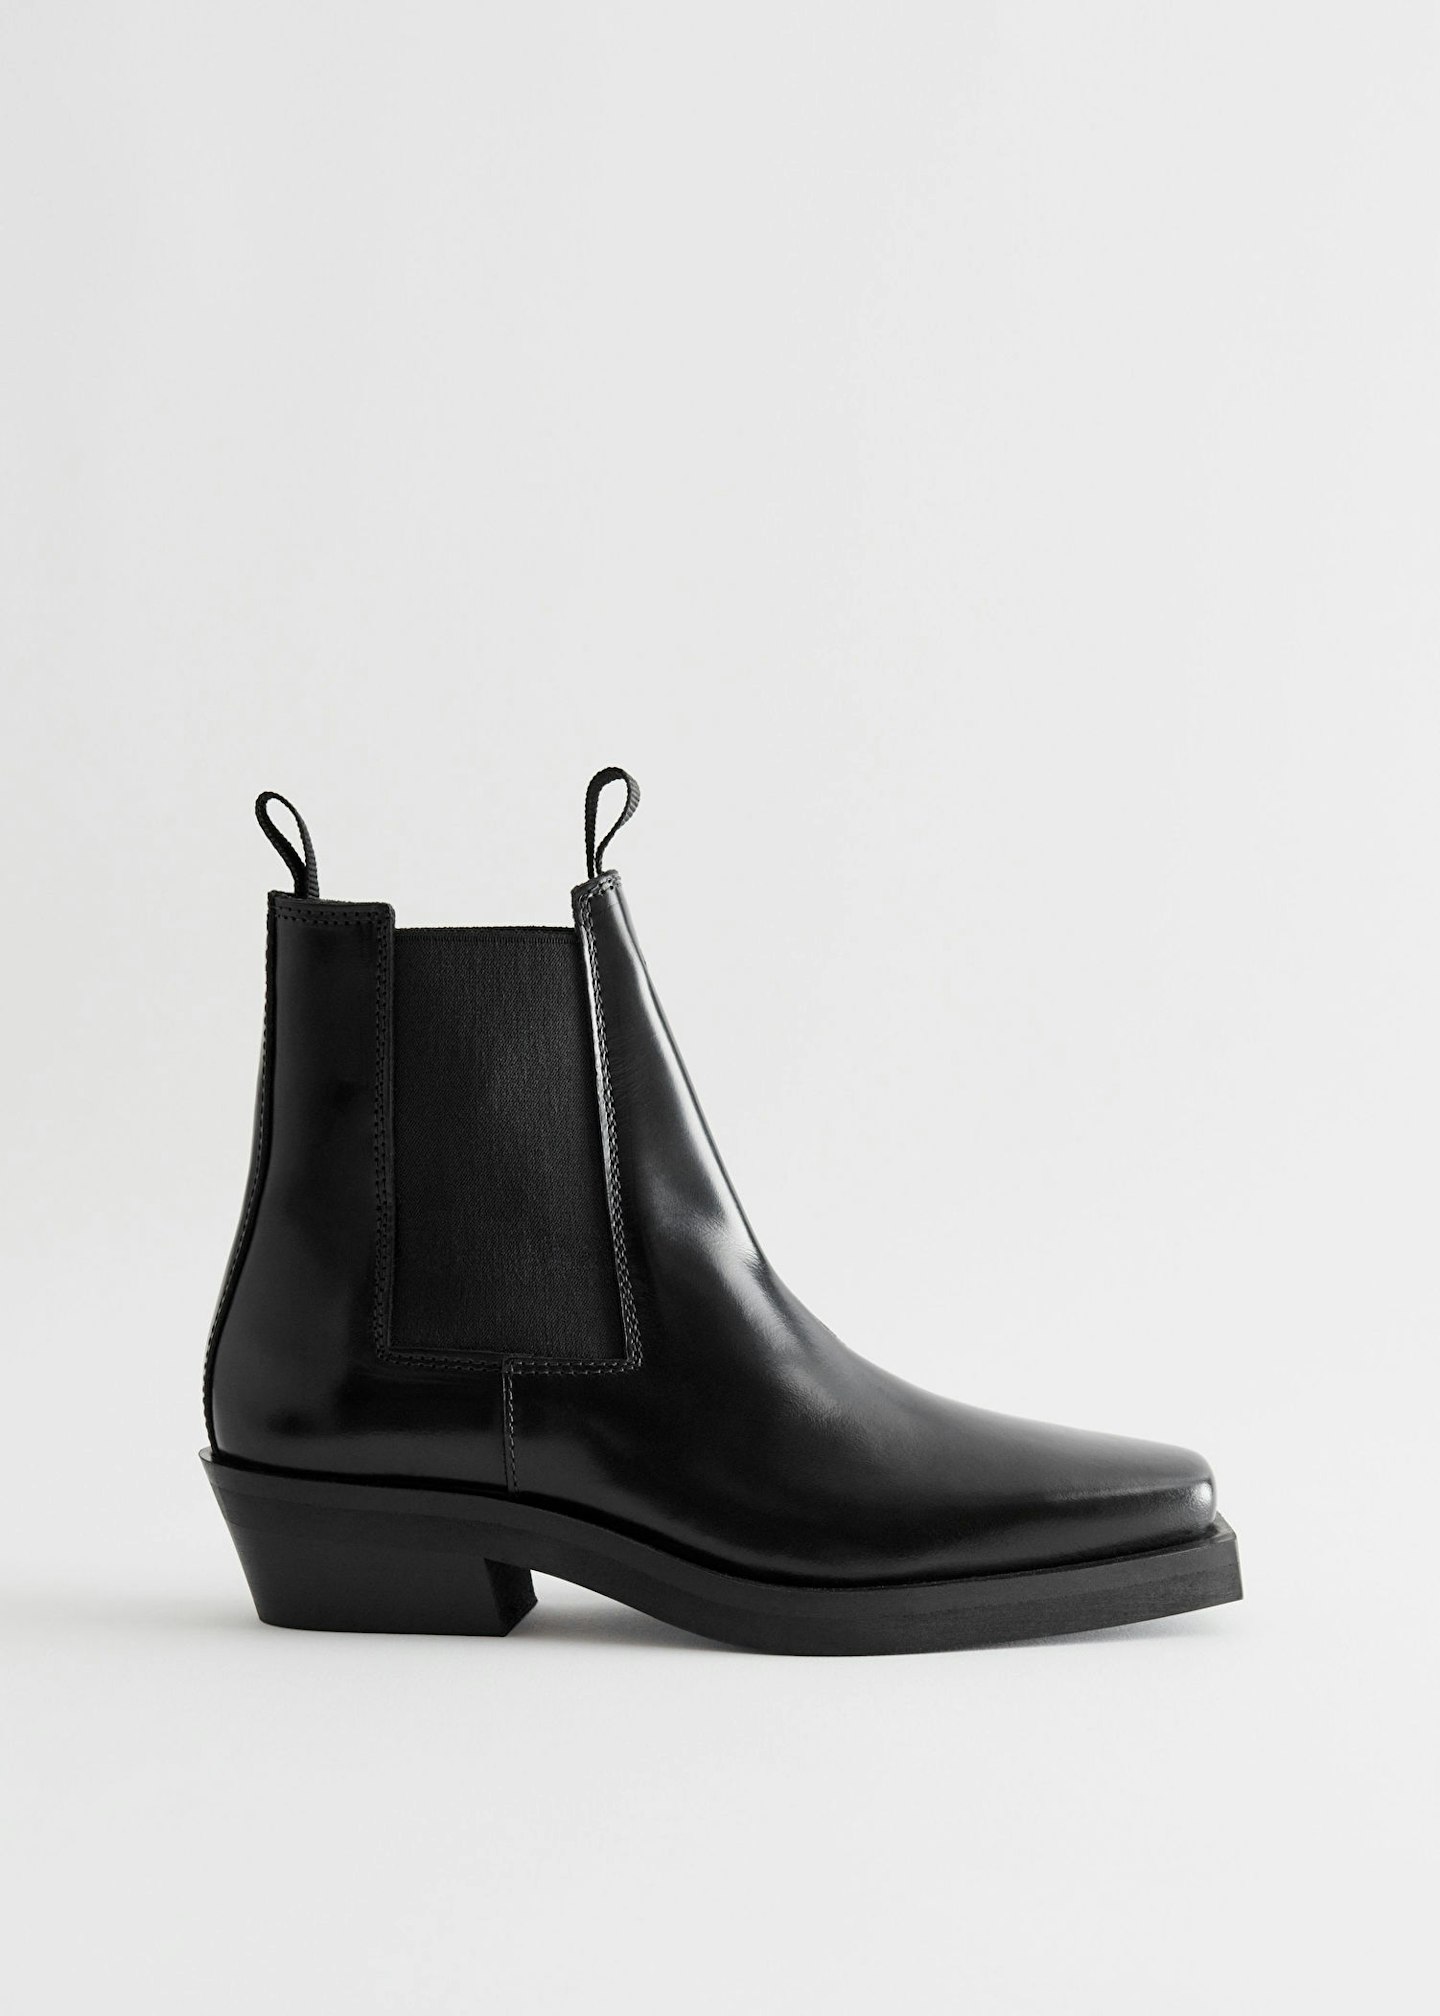 & Other Stories, Leather Chelsea Western Boots